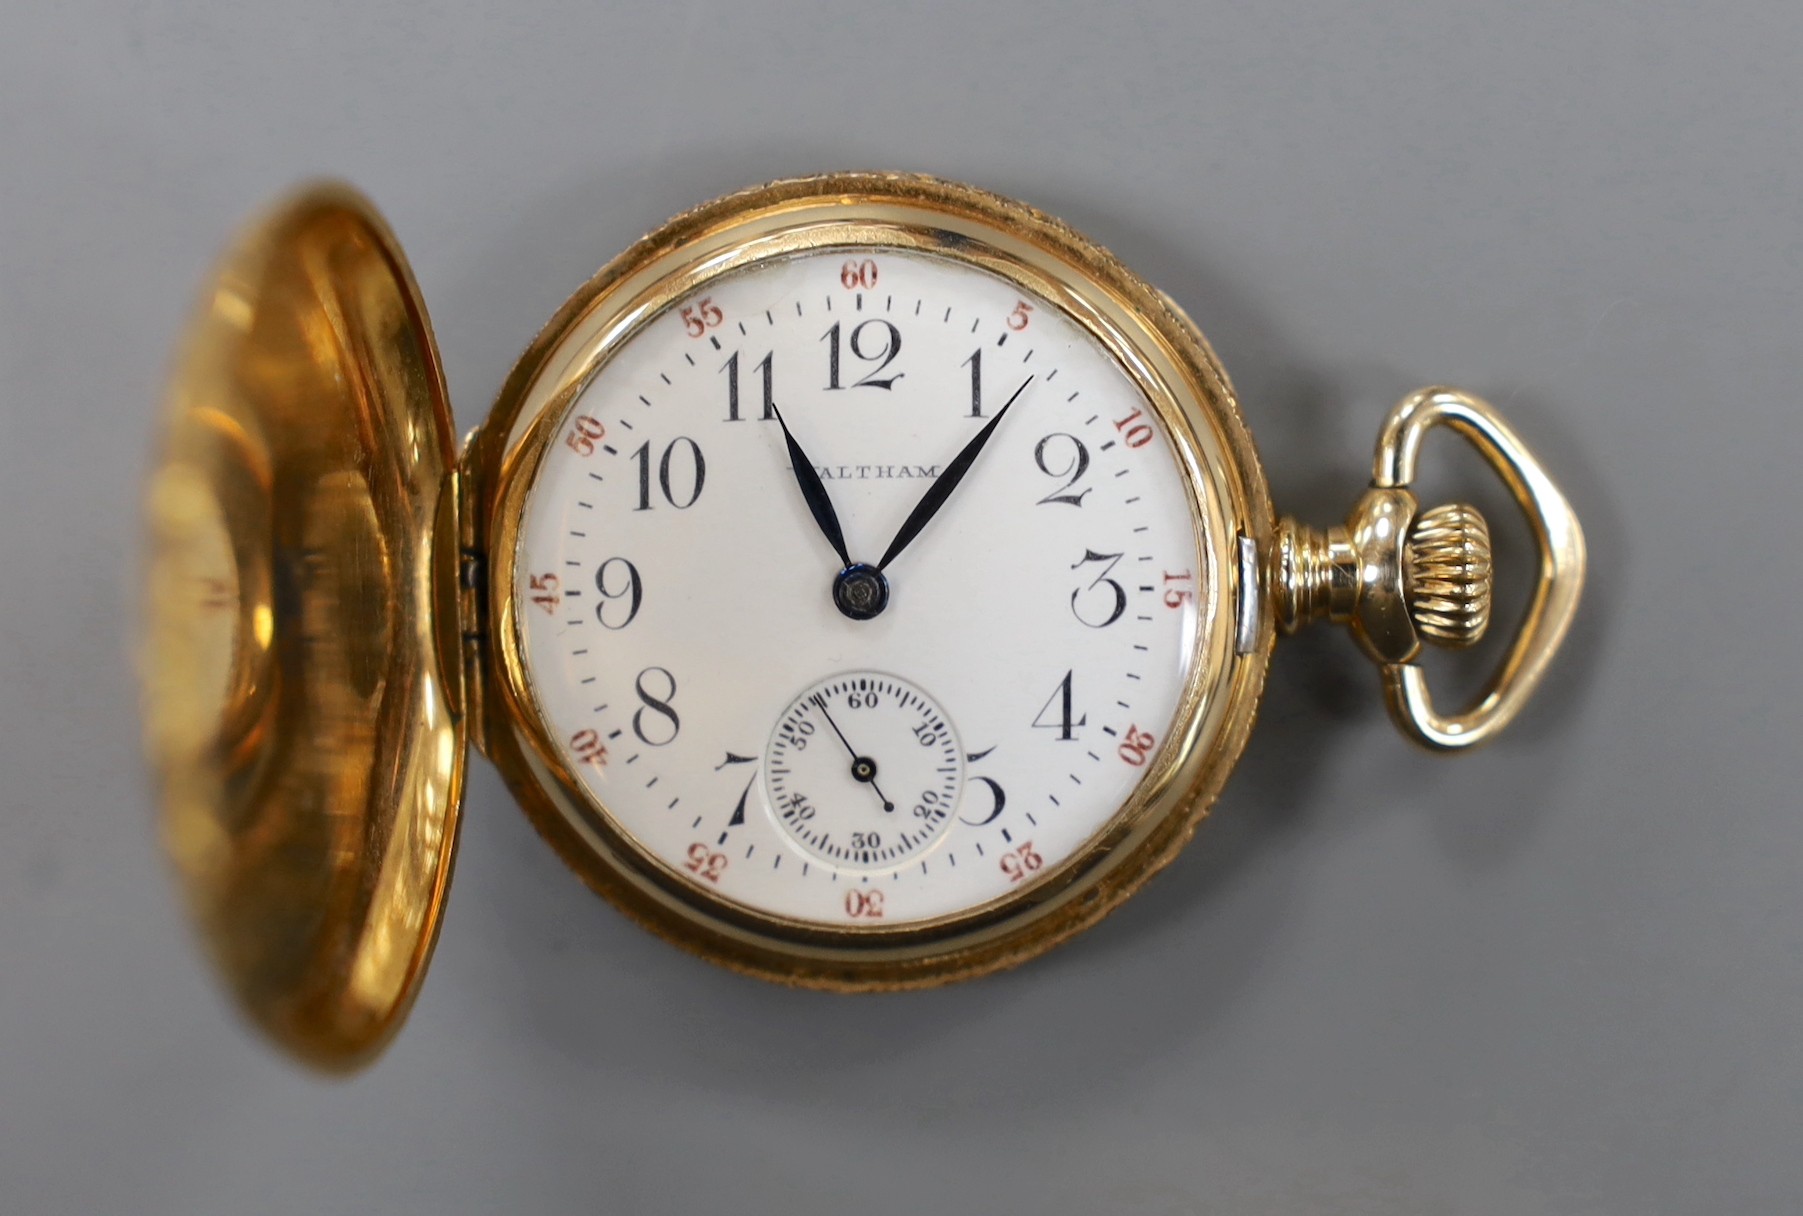 An early 20th century engraved 14k Waltham keyless hunter fob watch, with Arabic dial and engraved inscription